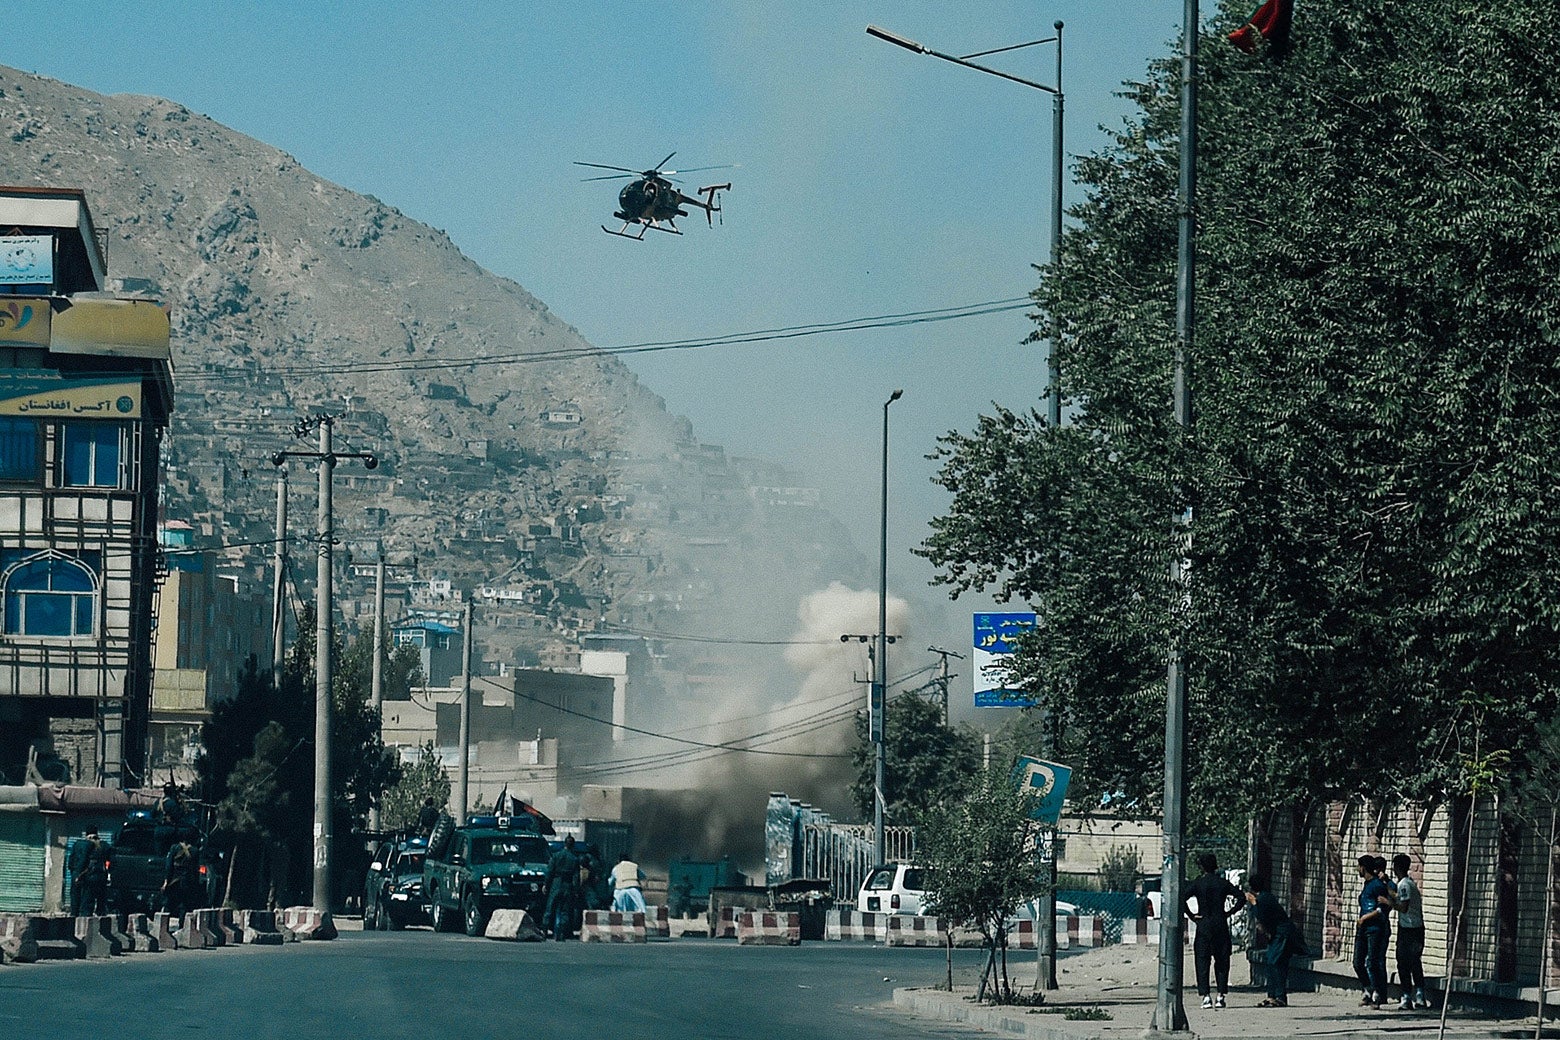 Smoke rises above a street with a helicopter overhead.